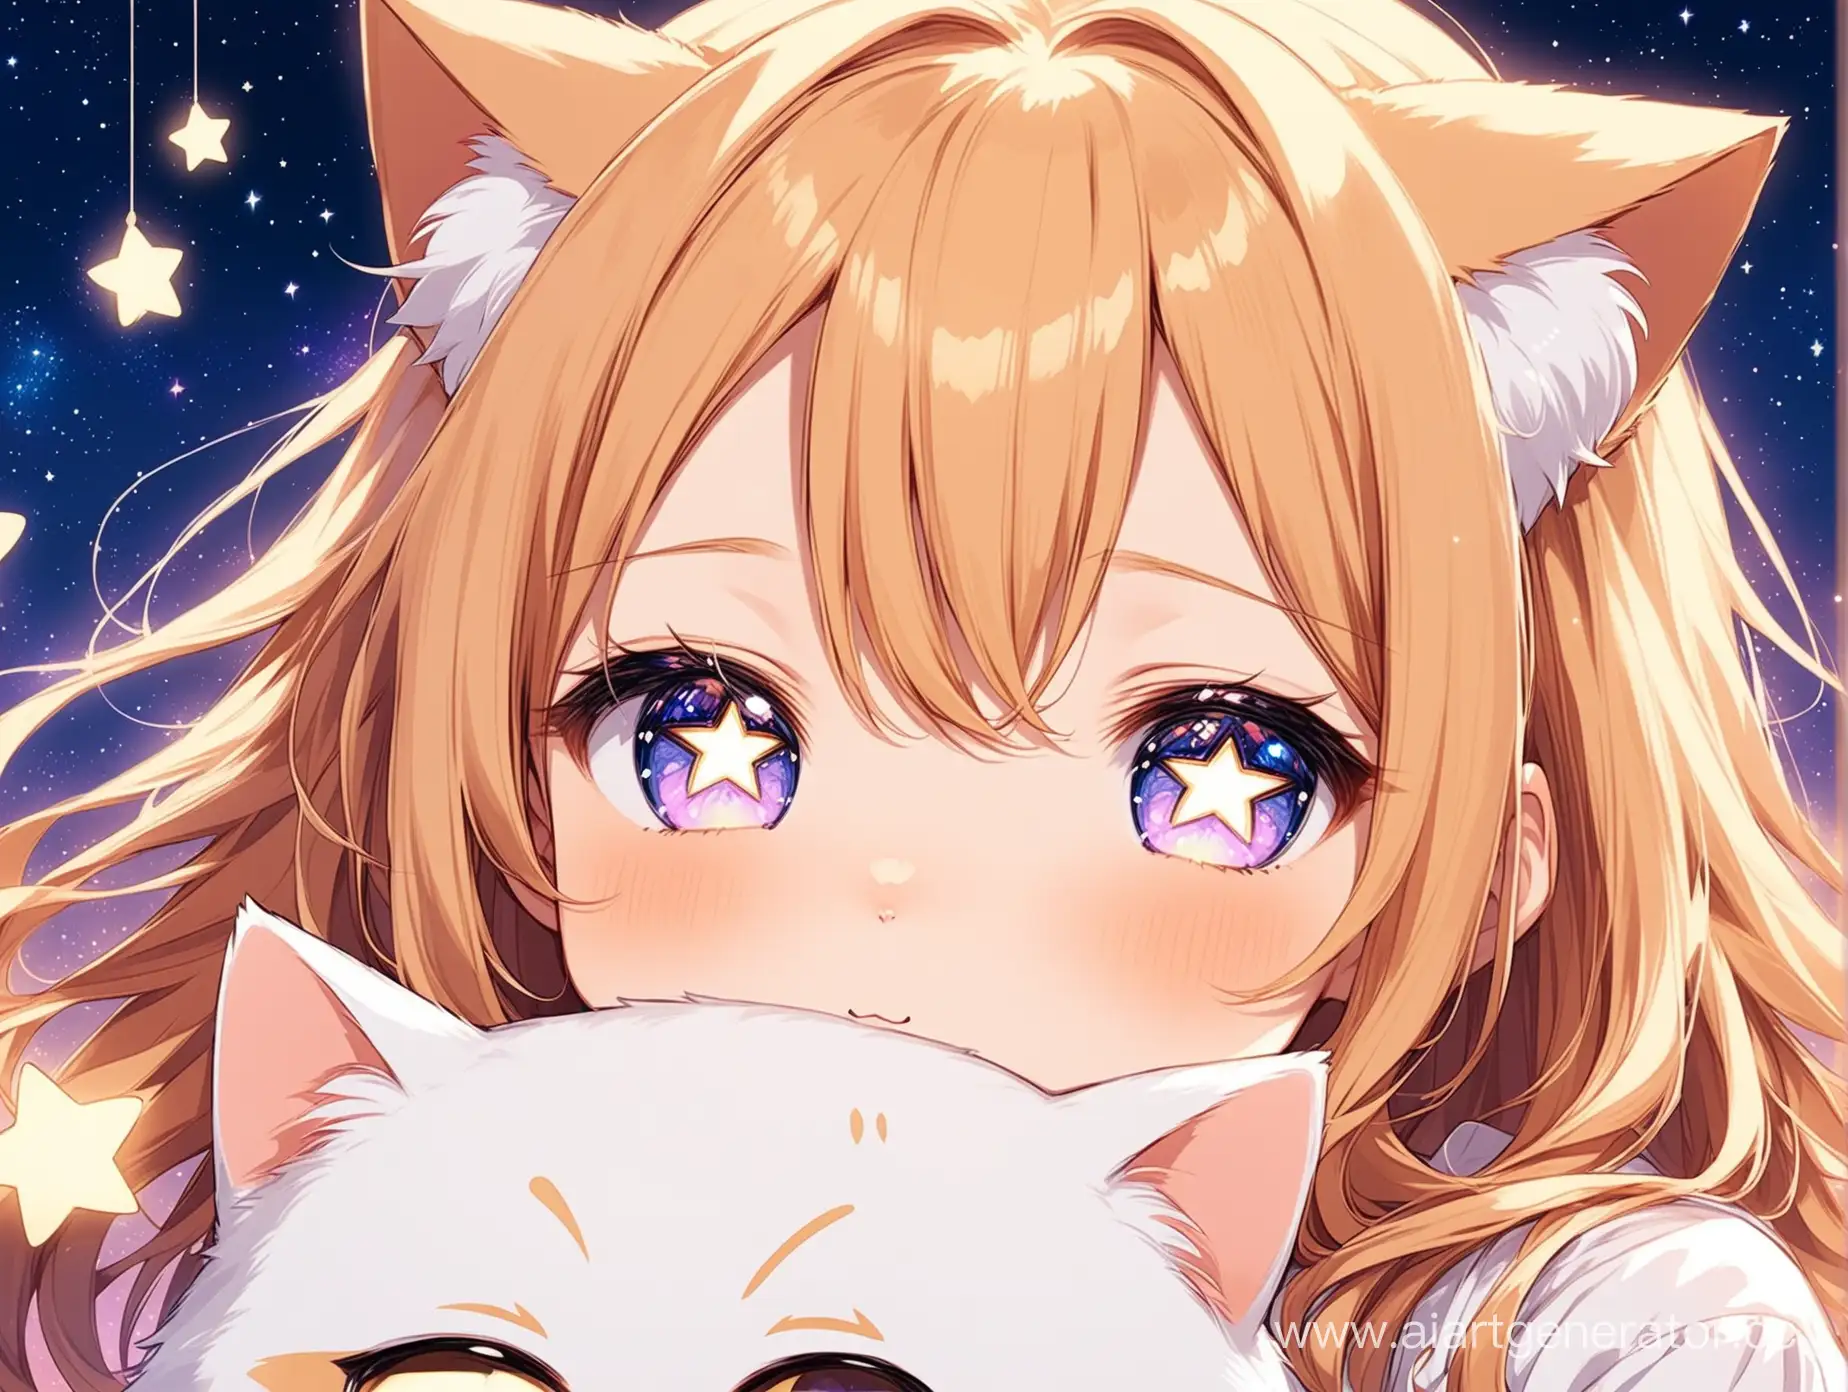 Anime character, girl cat in dream, star in eyes and cute face